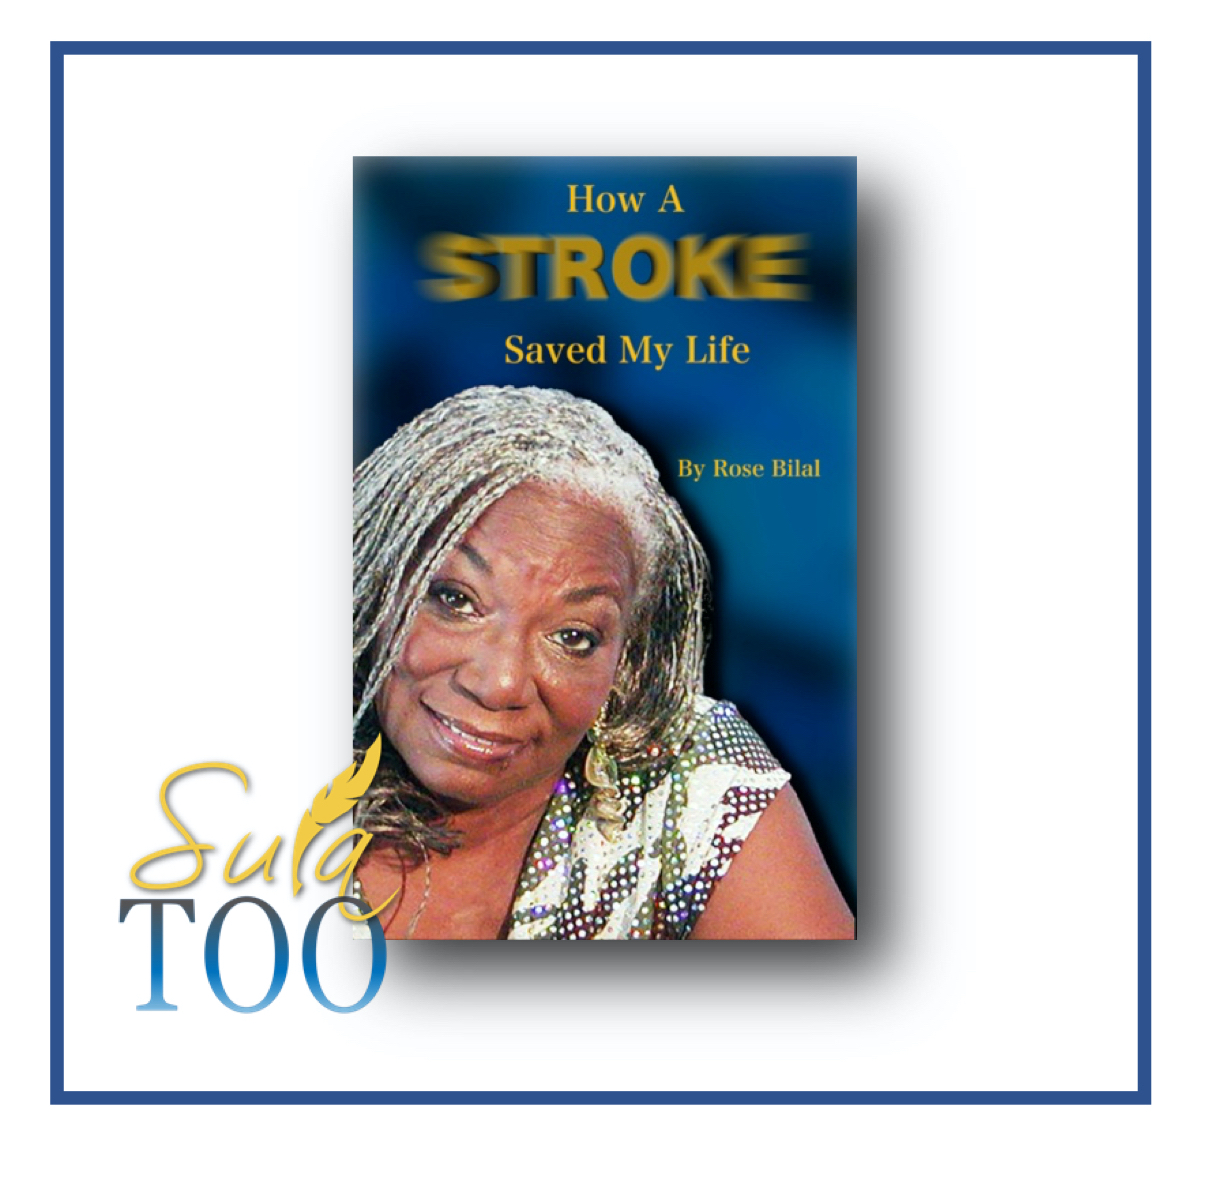 A Stroke Saved My Life by Rose Bilal